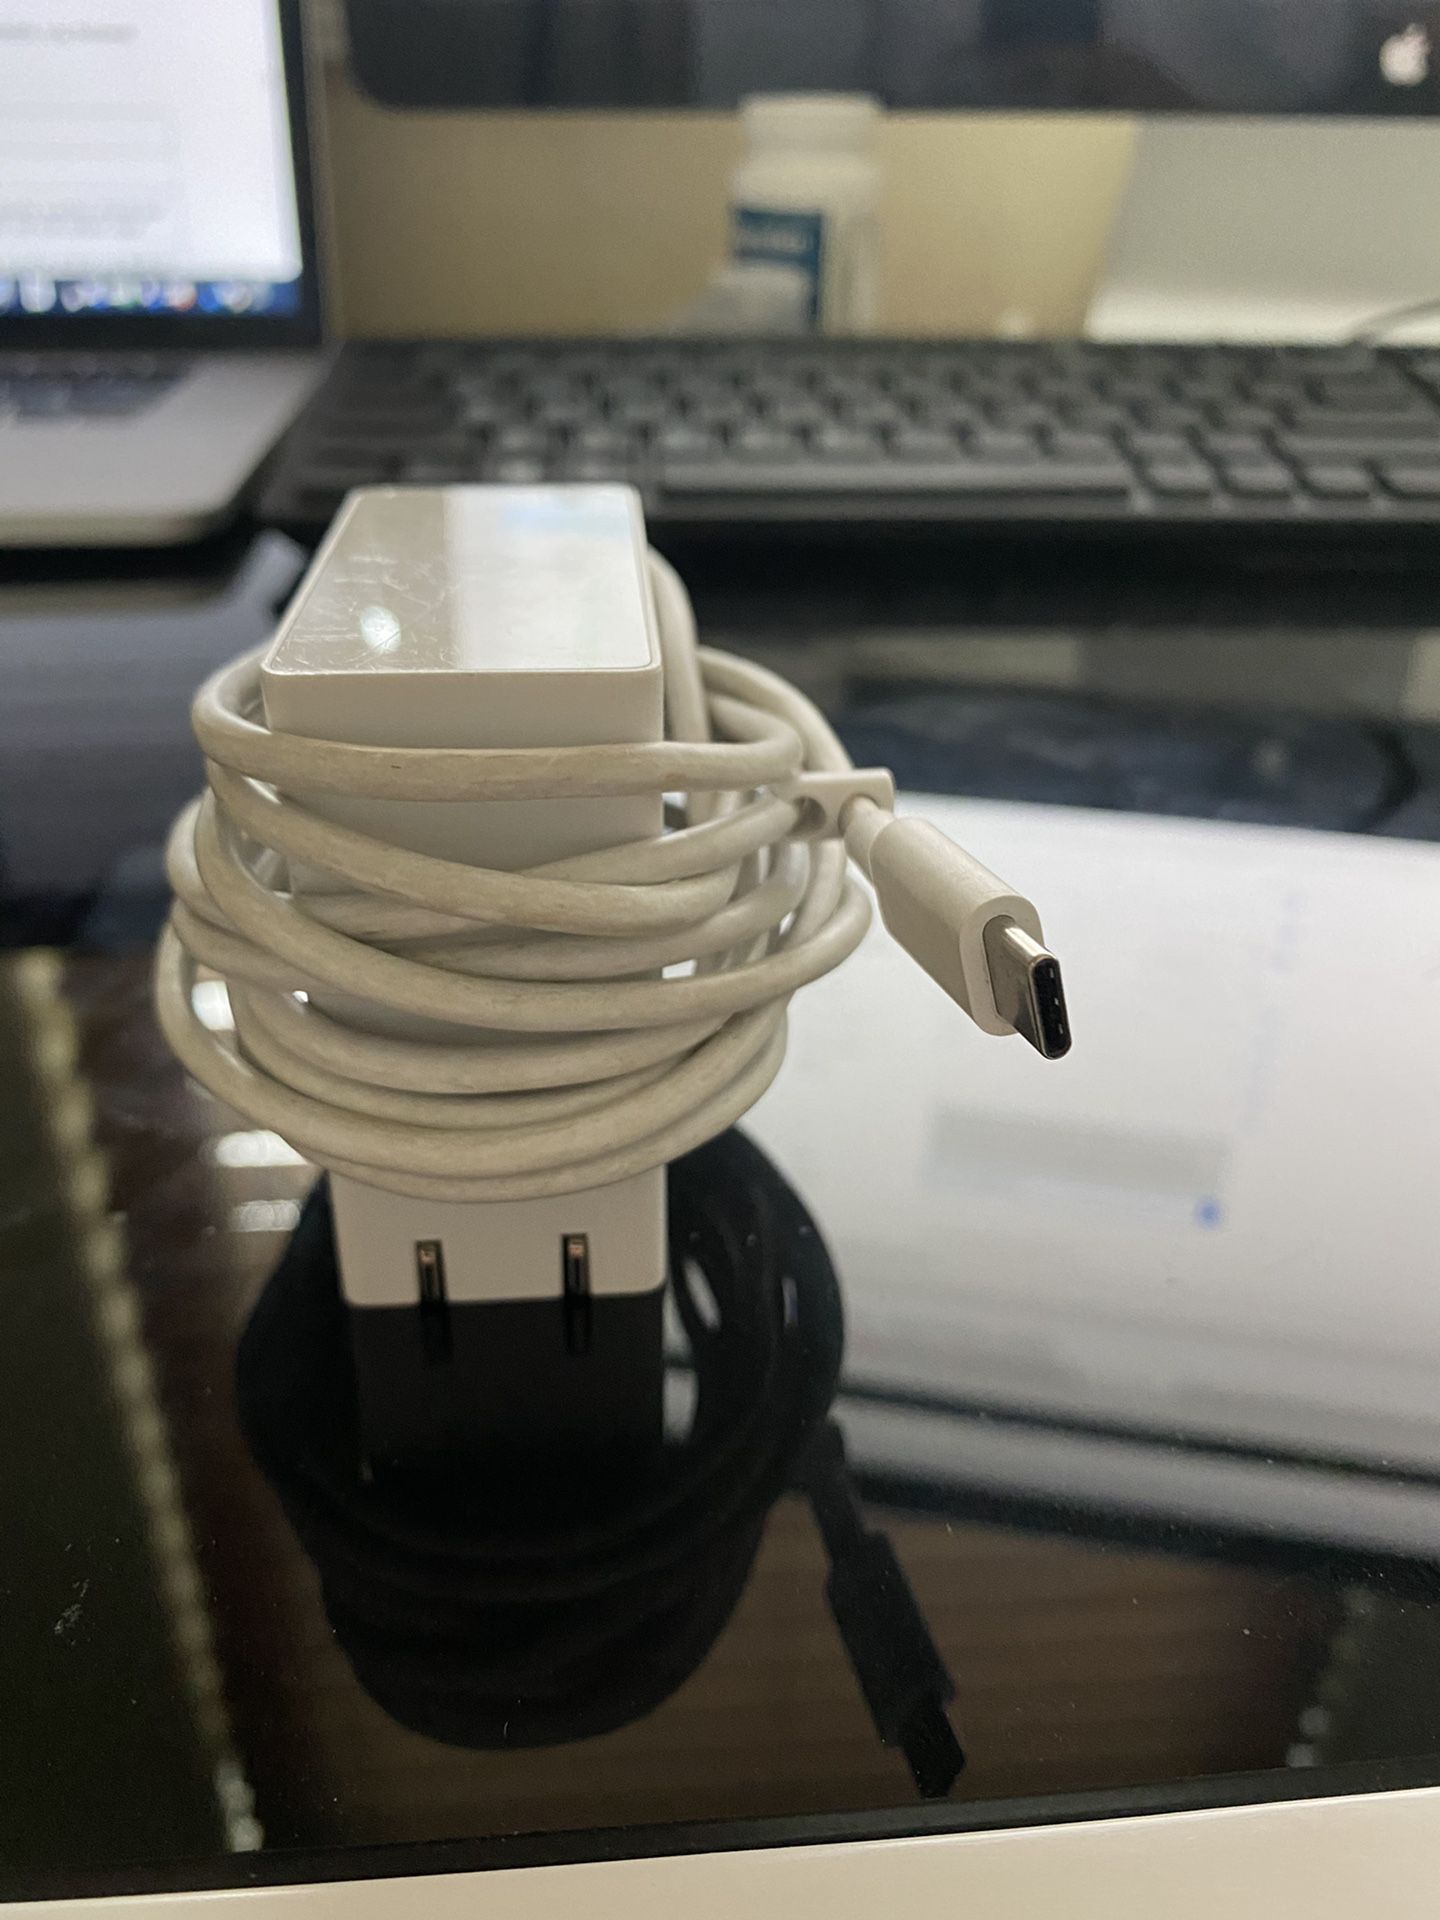 Google Chromebook Charger